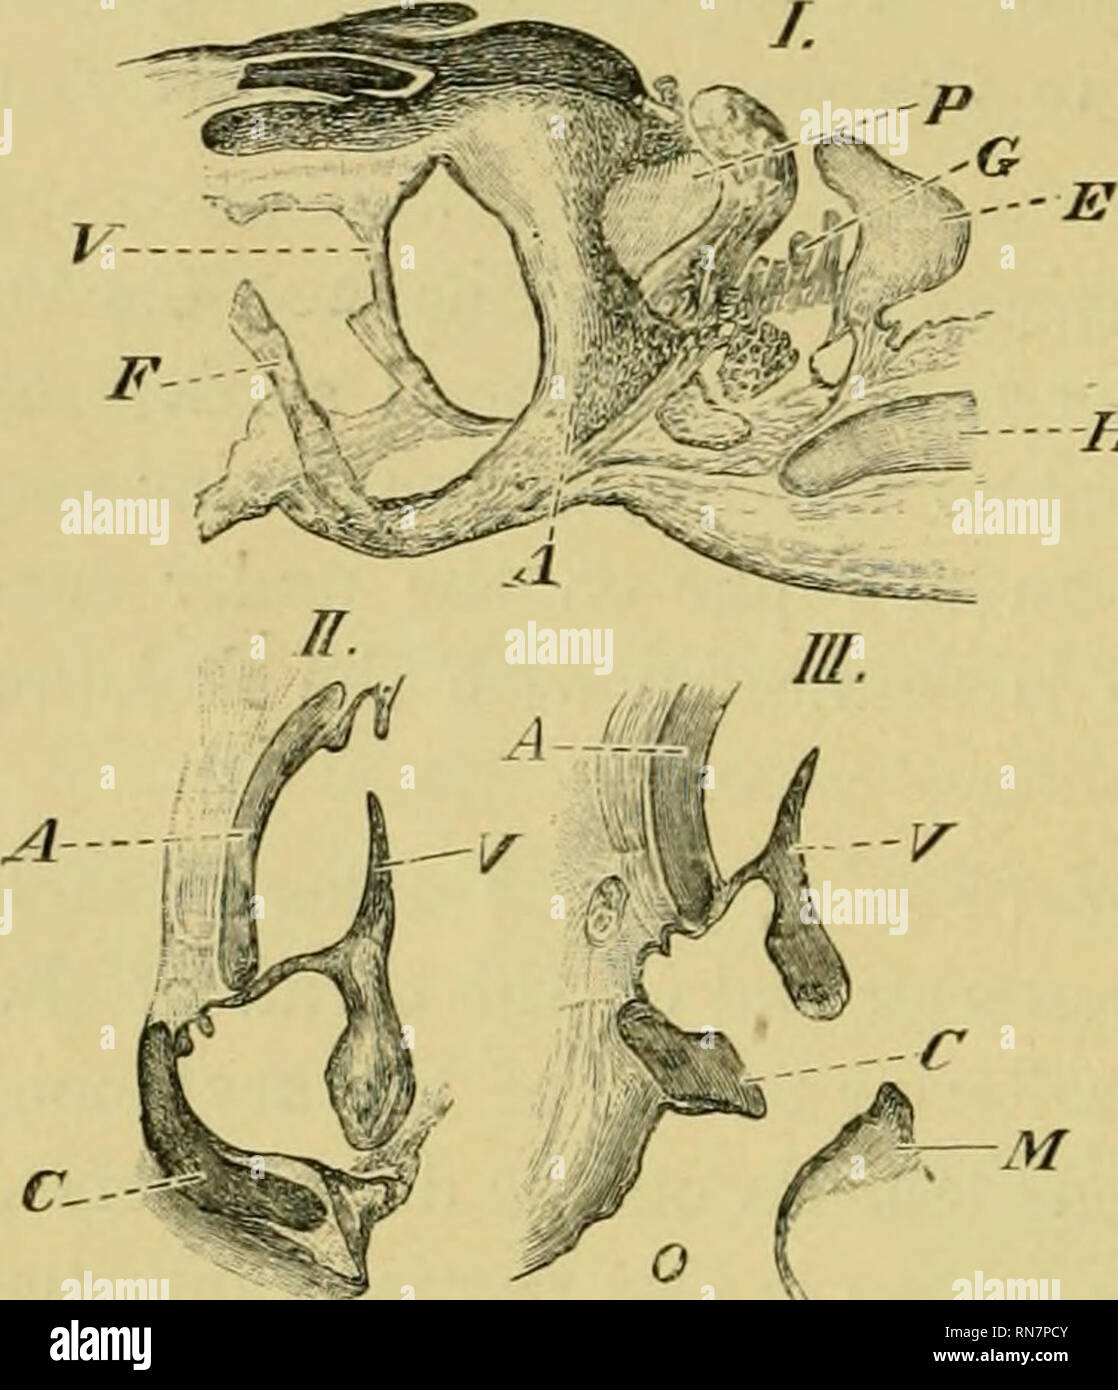 The anatomy of the frog. Frogs -- Anatomy; Amphibians -- Anatomy. 316 THE  LAKYNX, LUNGS, VOCAL SACS, ETC. Fie. 206. H. The anterior and posterior  borders are not parallel but are